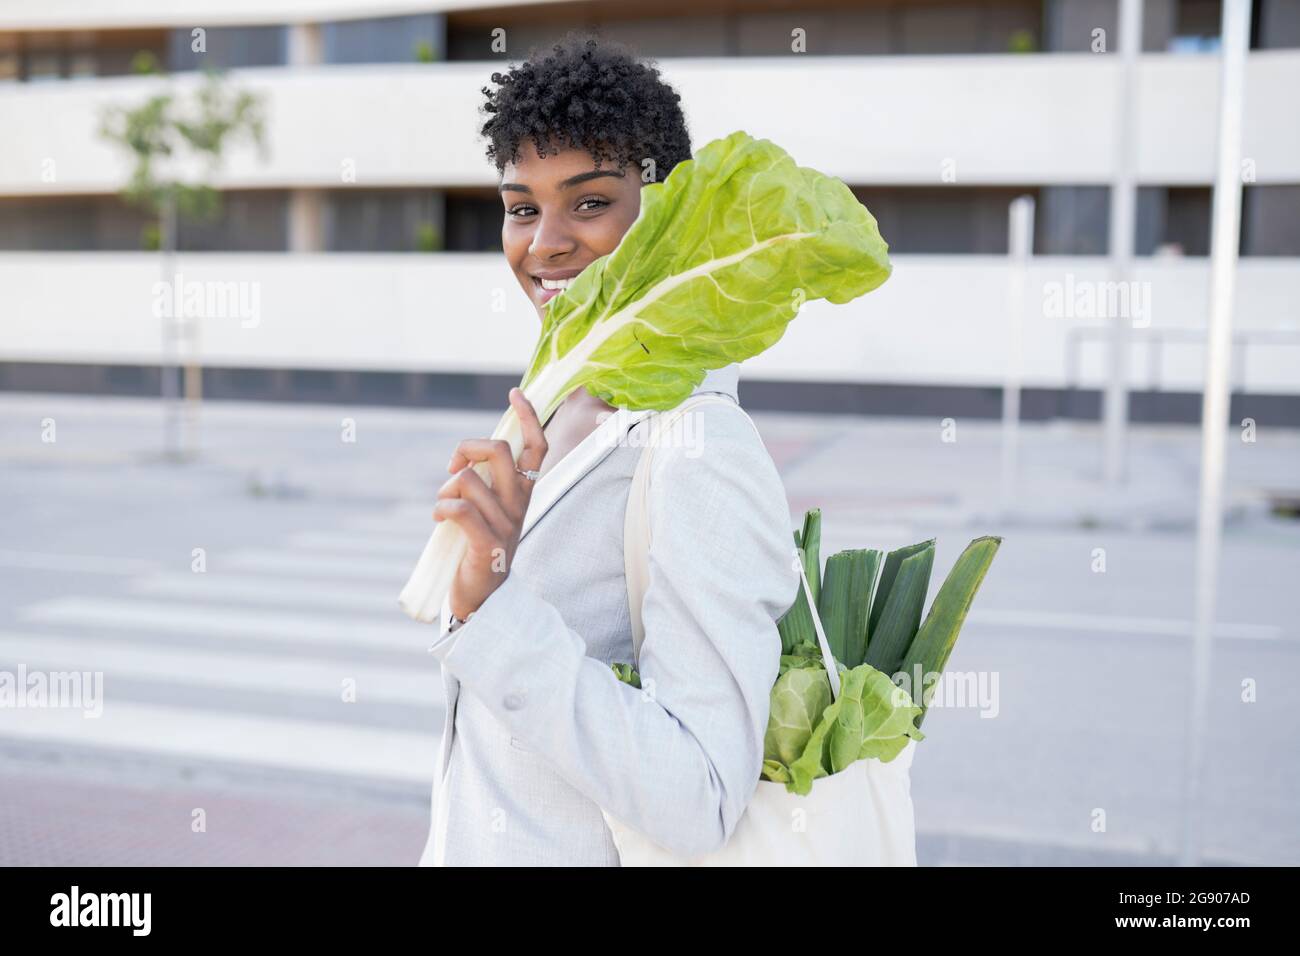 Smiling businesswoman holding leaf vegetable in city Stock Photo